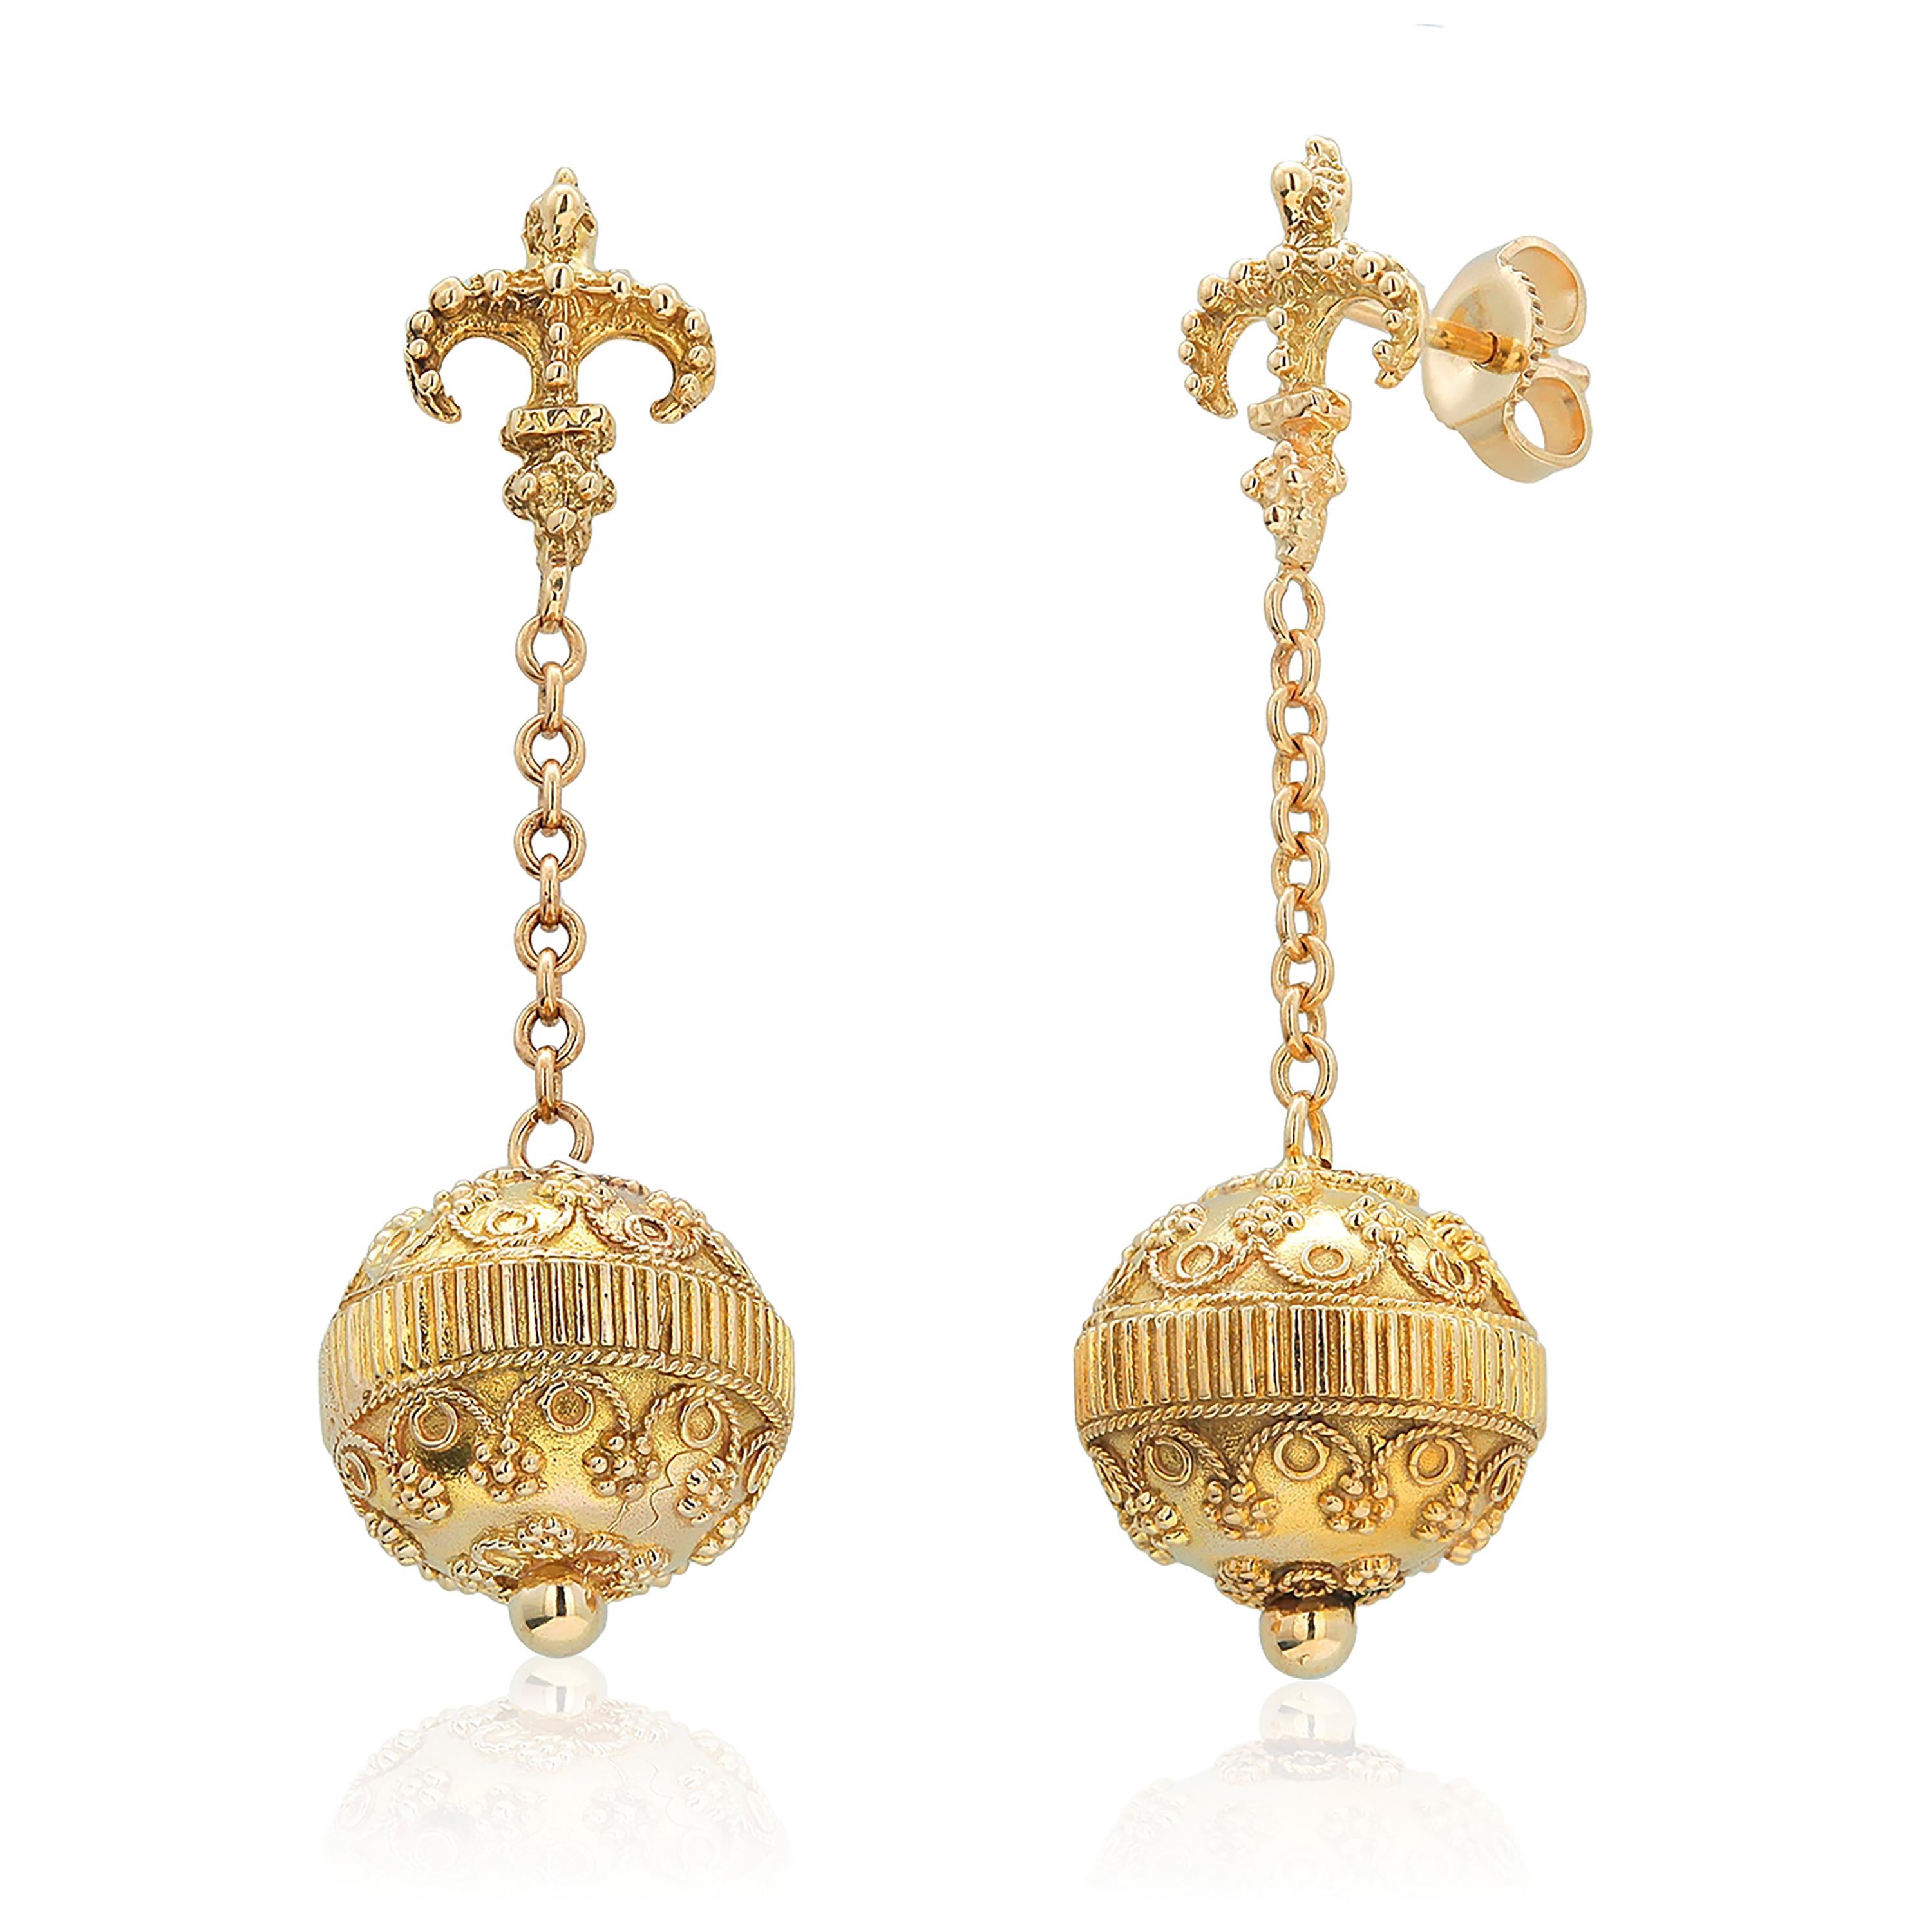 Etruscan Revival Yellow Gold Drop Earrings Dating Back to the Revival Etruscan Period in Italy